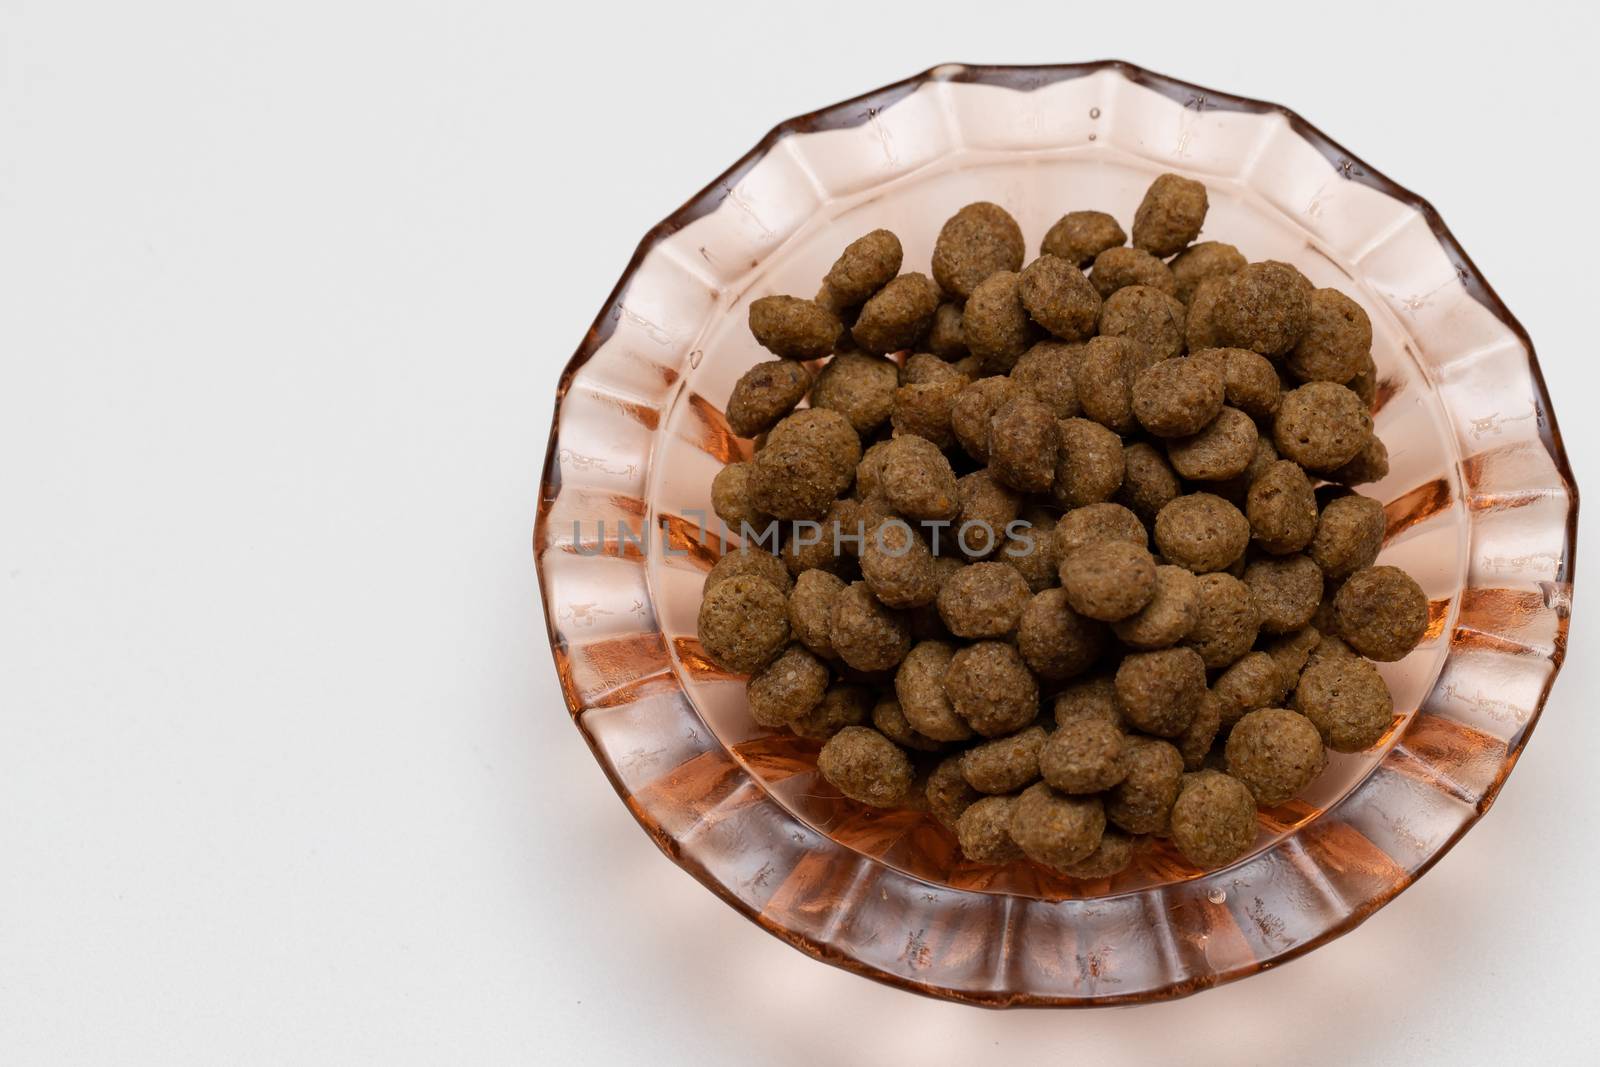 Balls of cat food in a beautiful bowl on a white background by bonilook